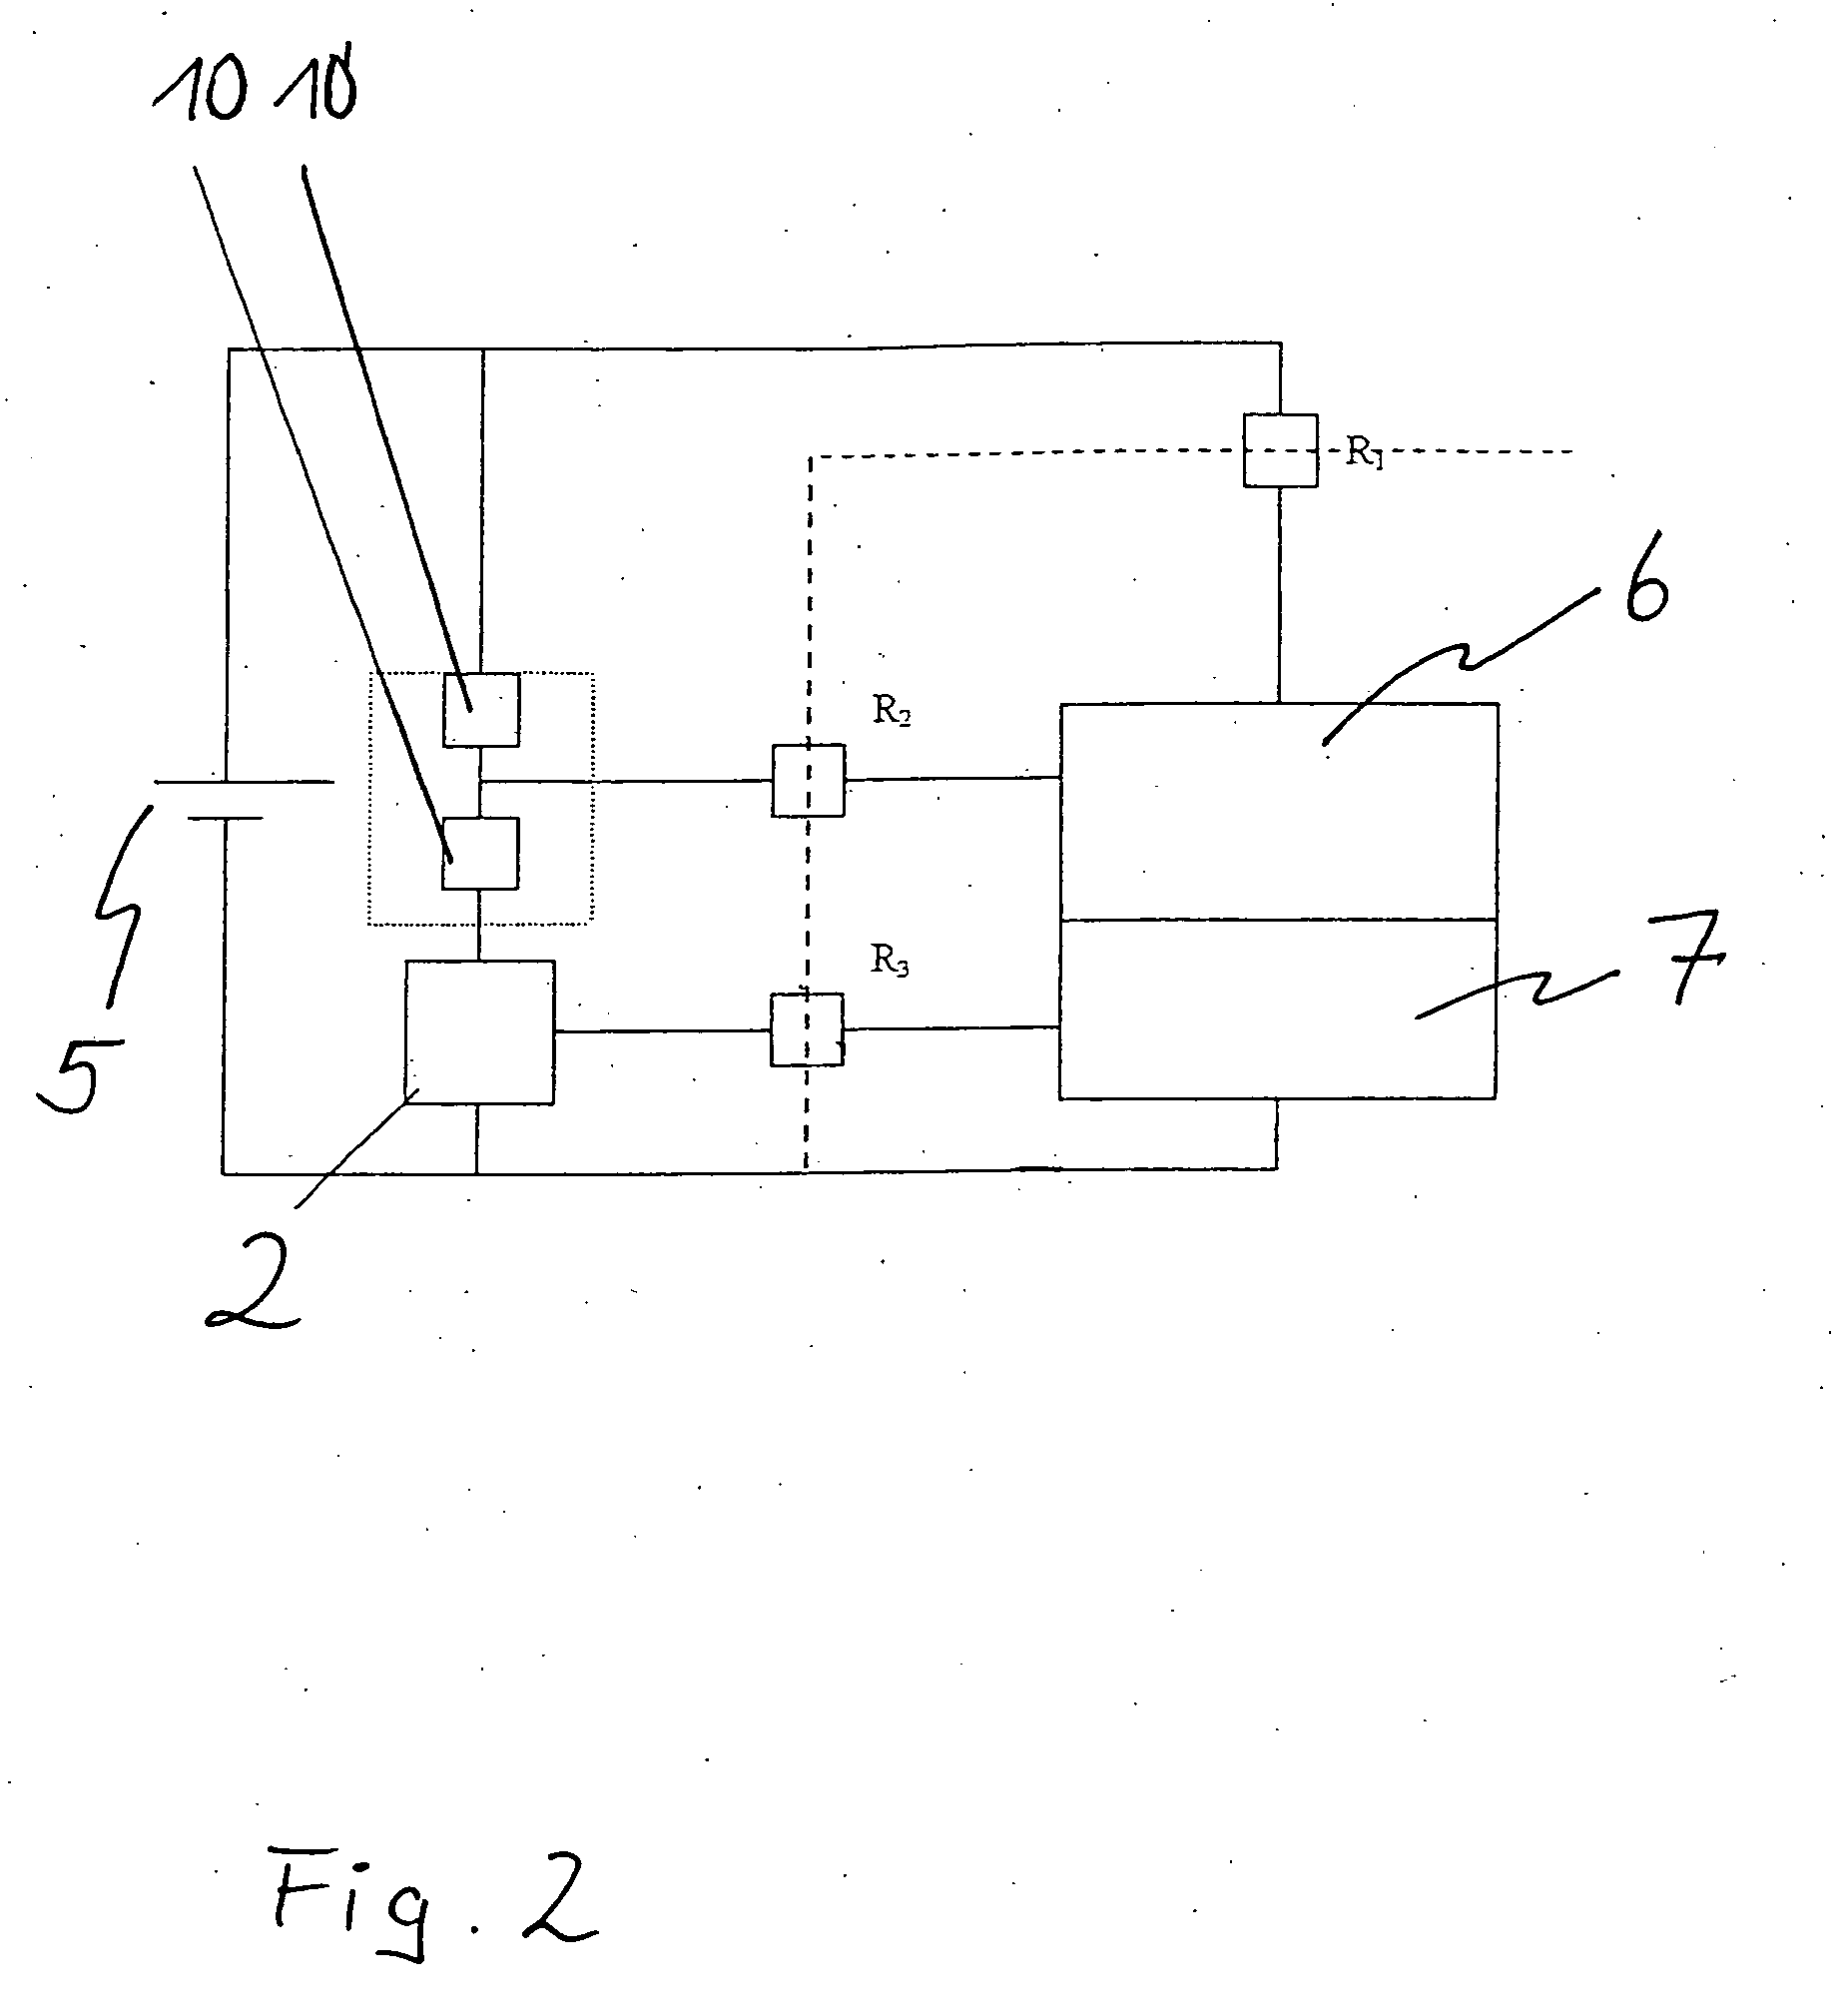 Circuit with at least one catalytic measuring element